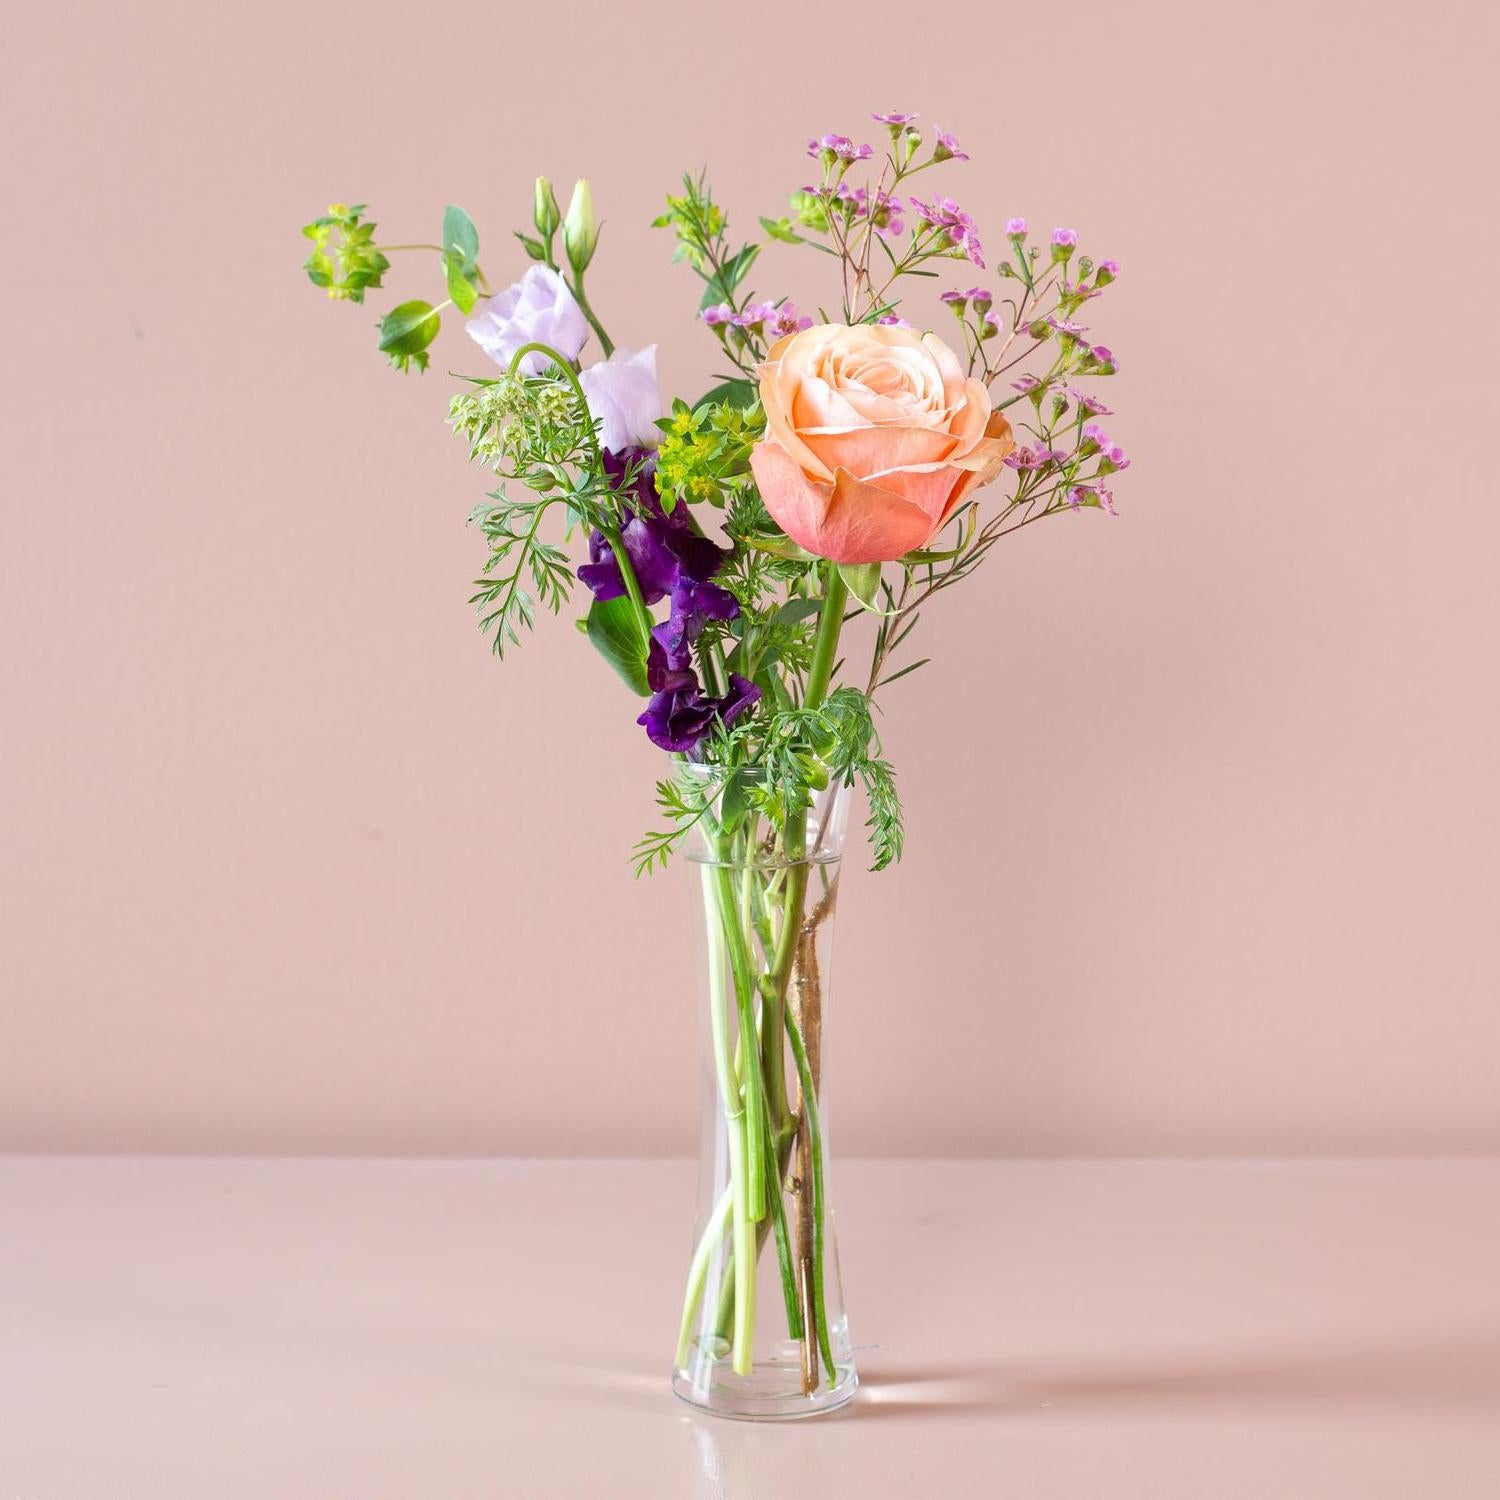 The vase holds a delicate display of flowers, including a peach-colored rose, purple flowers, and greenery, set against a pale pink background.